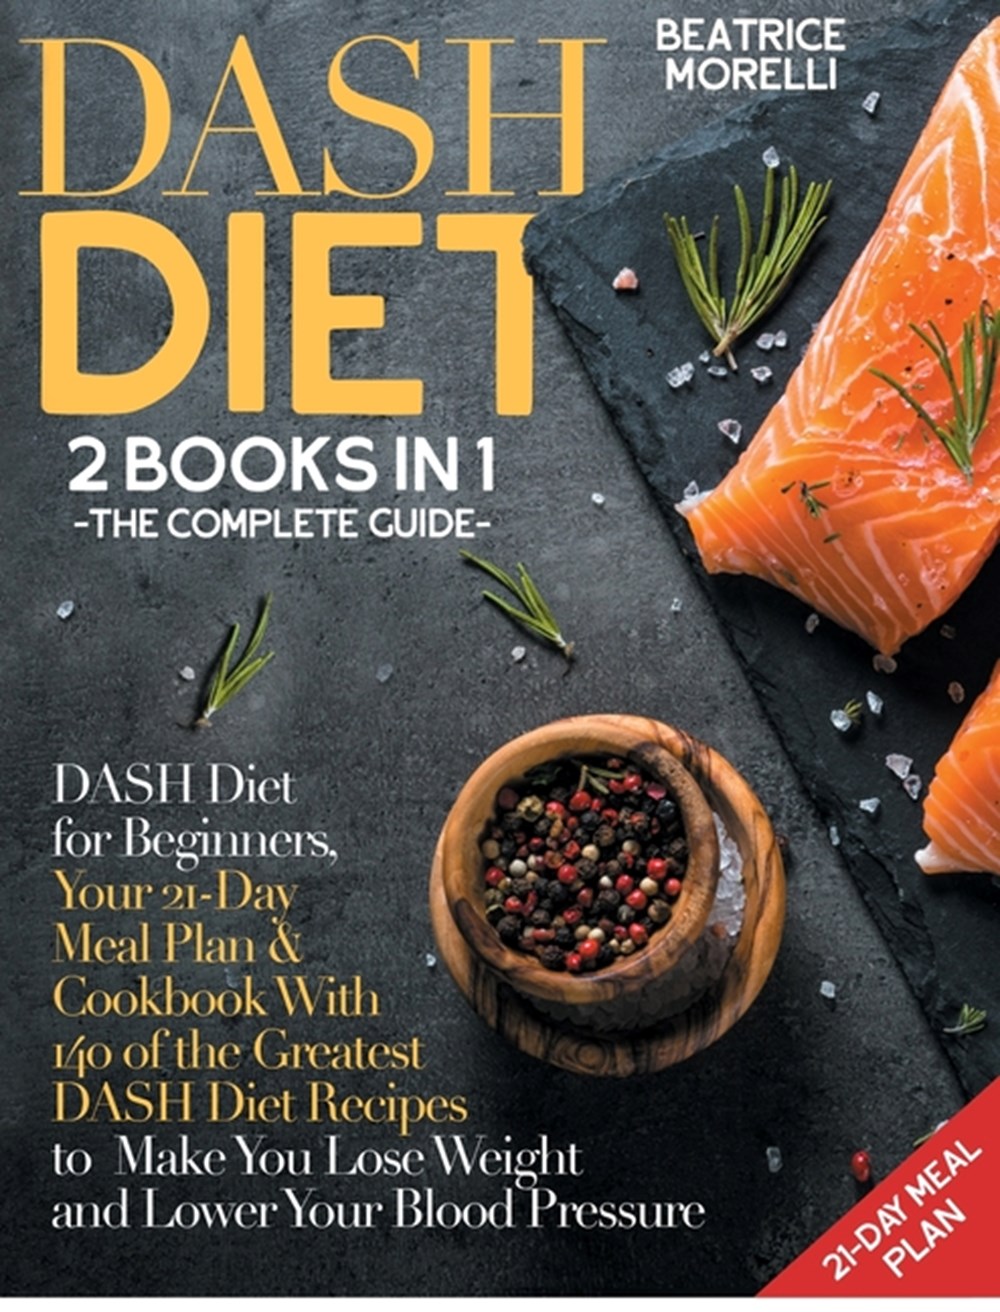 Buy DASH Diet The Complete Guide. 2 Books in 1 DASH Diet for